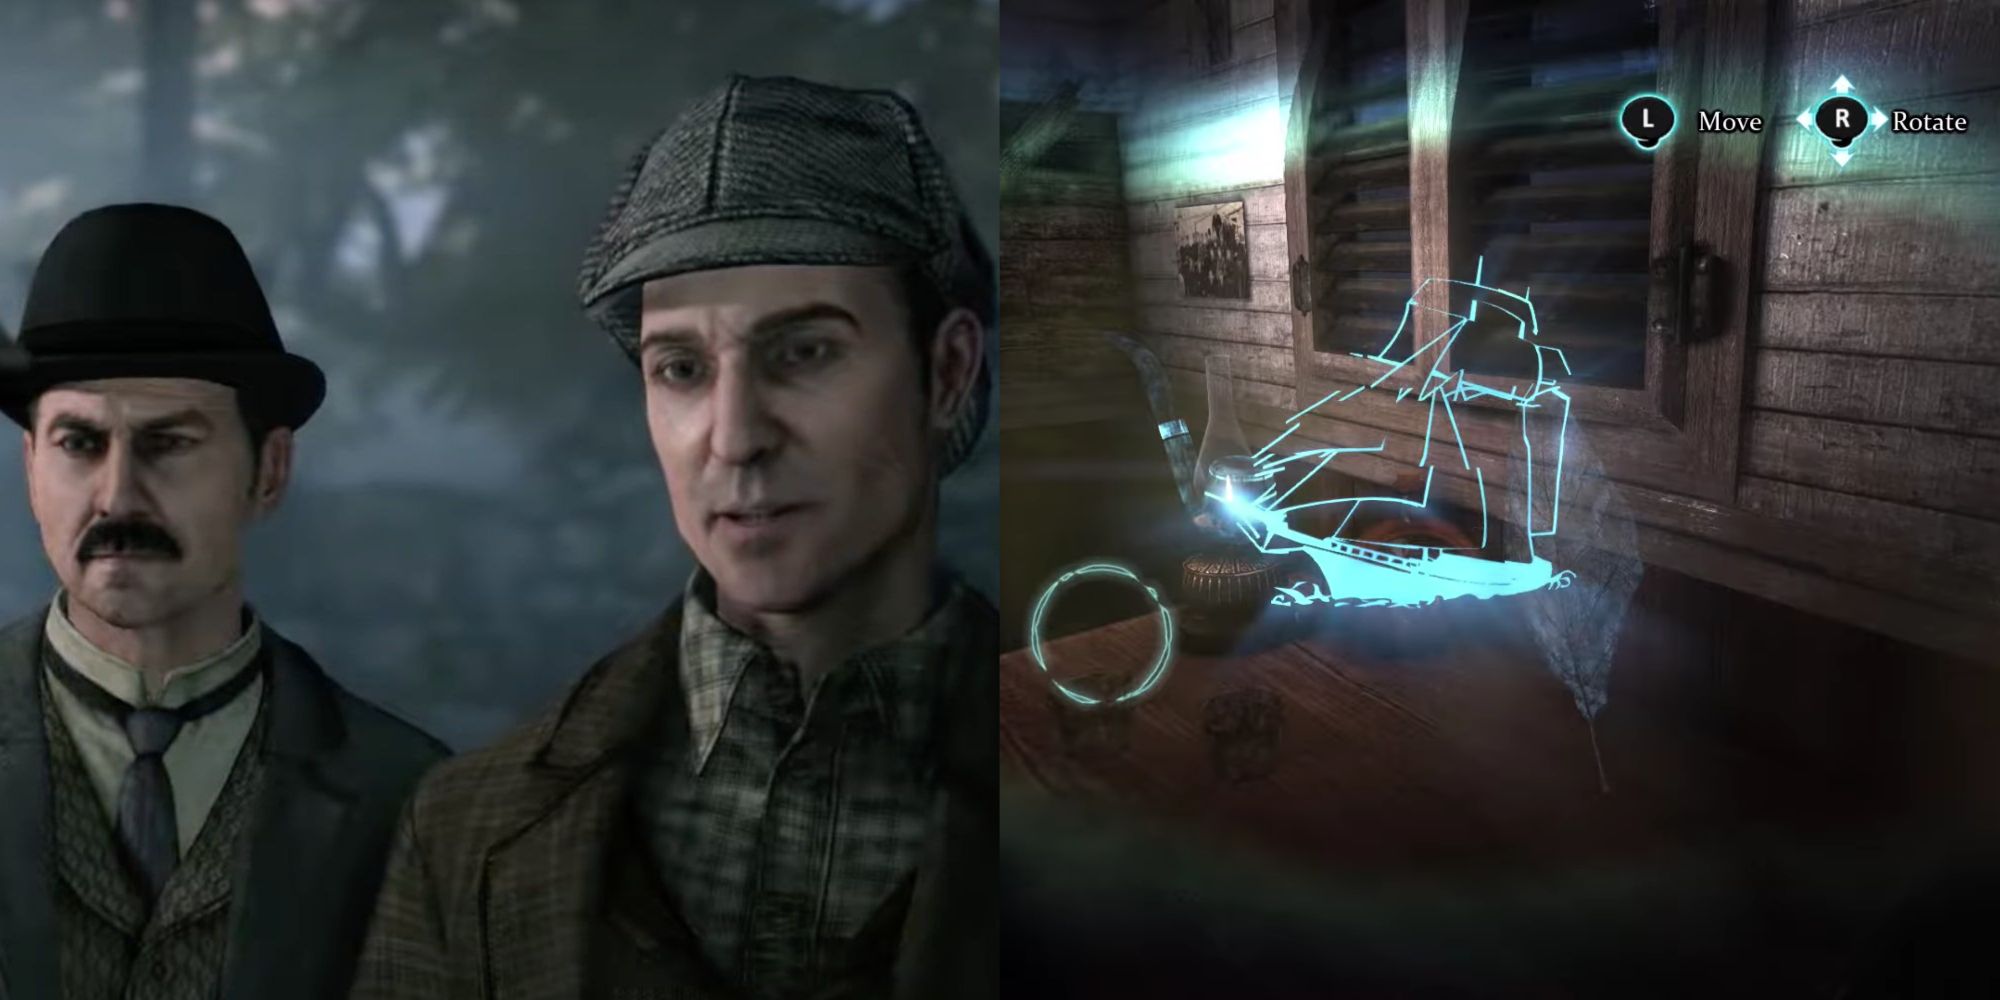 A split image of Holmes and Watson and a puzzle being solved by a player in Crimes and Punishments.